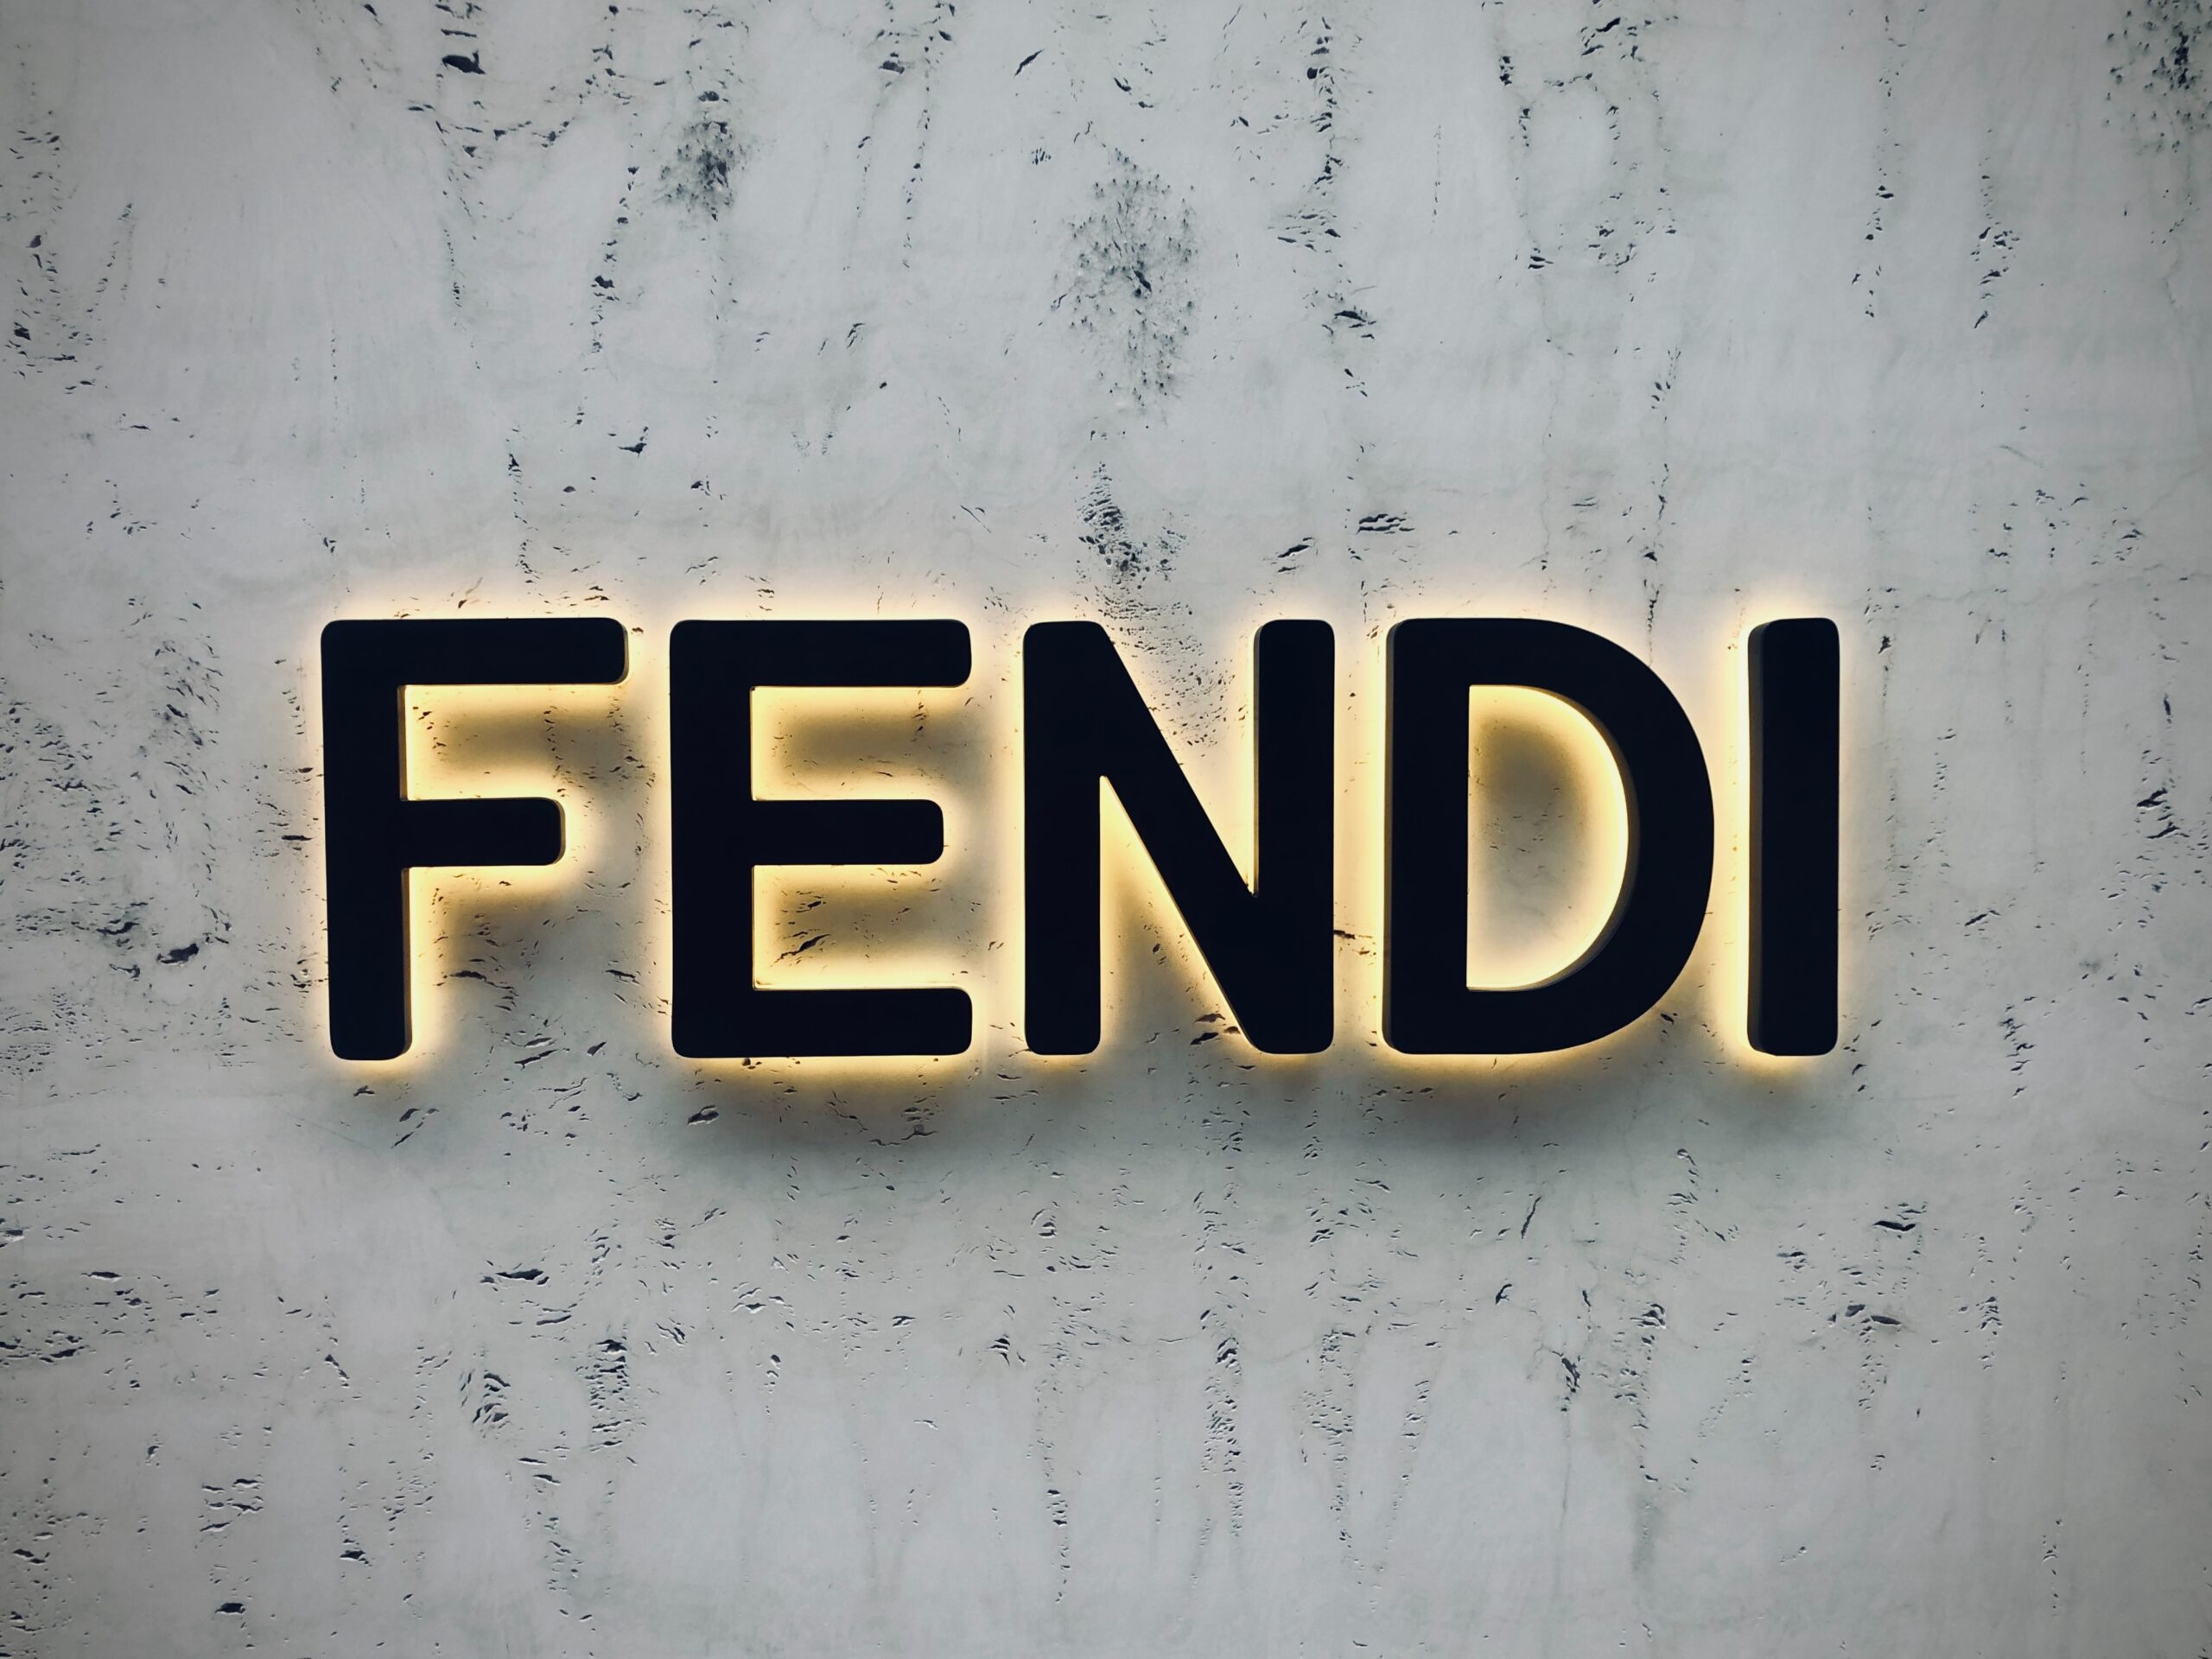 Fendi expands presence in Tuscany with new logistics centre in Serravalle Pistoiese Renowned fashion brand Fendi strengthens commitment to the Region through strategic investments. The Logistics centre expansion follows after an investment in 2019.